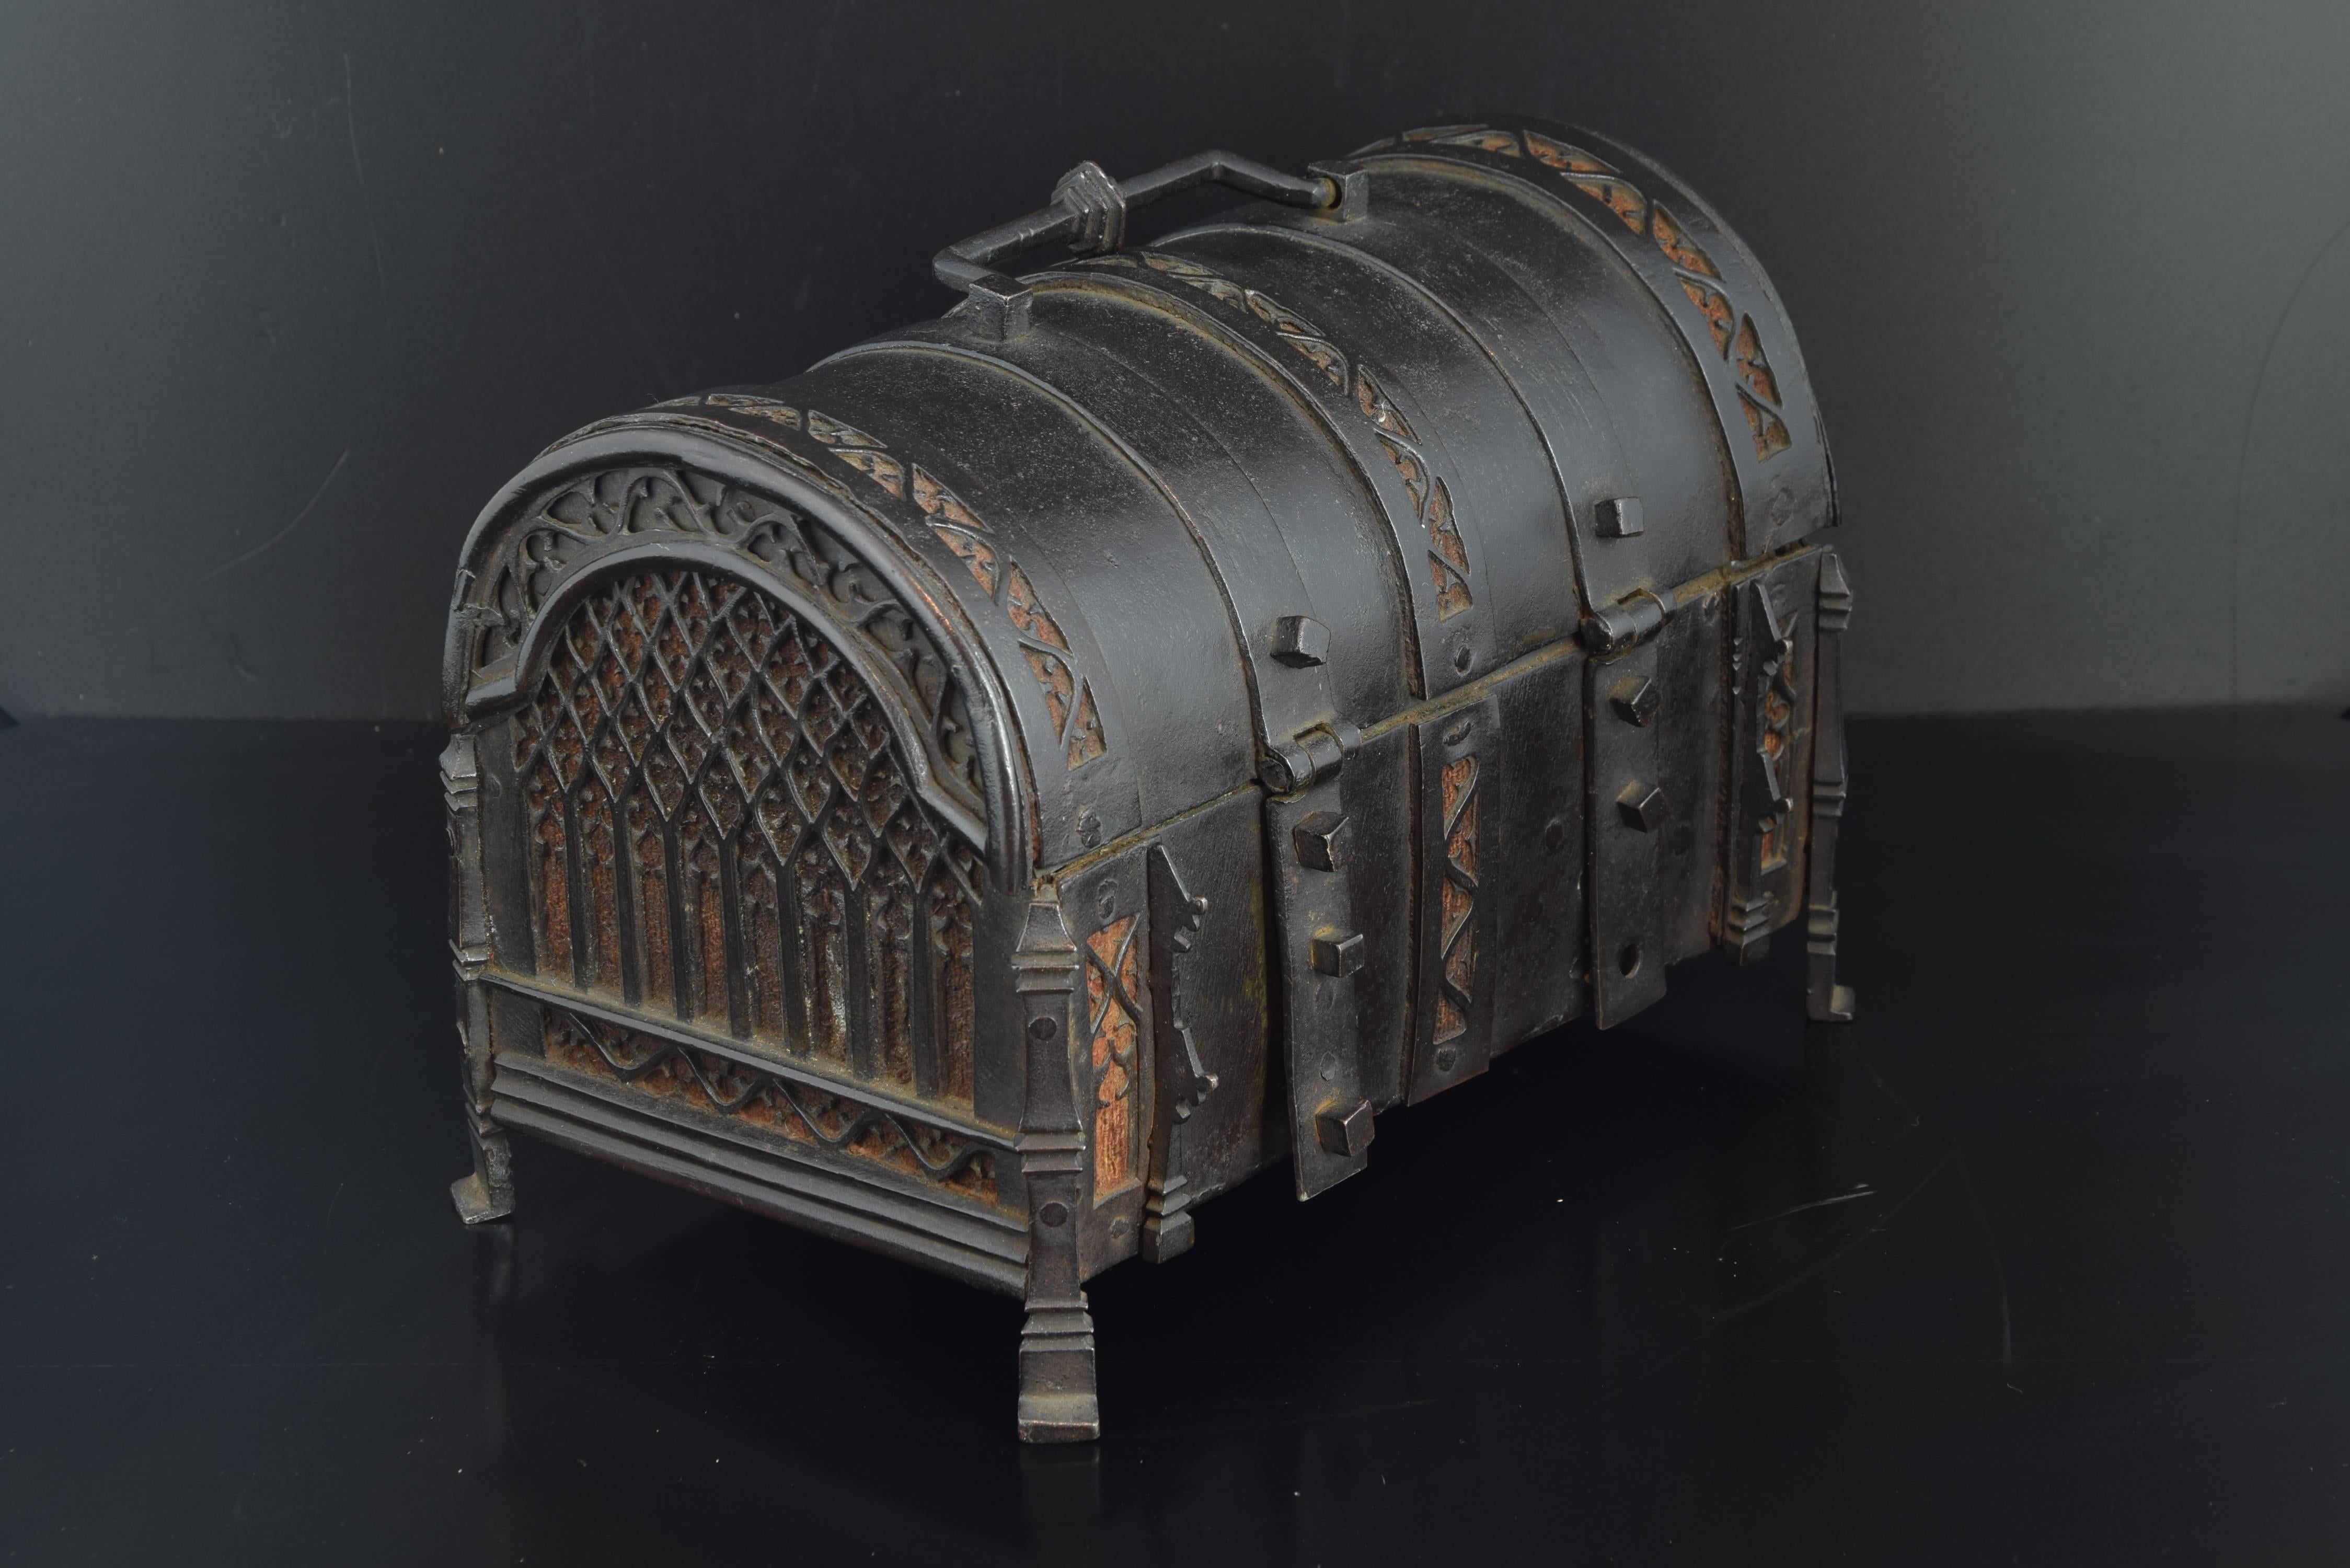 Gothic chest, Spain, late 15th century.
Wrought iron and velvet.
Spanish Gothic chest, with wrought iron structure of architectural inspiration. It has a convex cover, typical of the Spanish chests of the time, and has decorated decorations